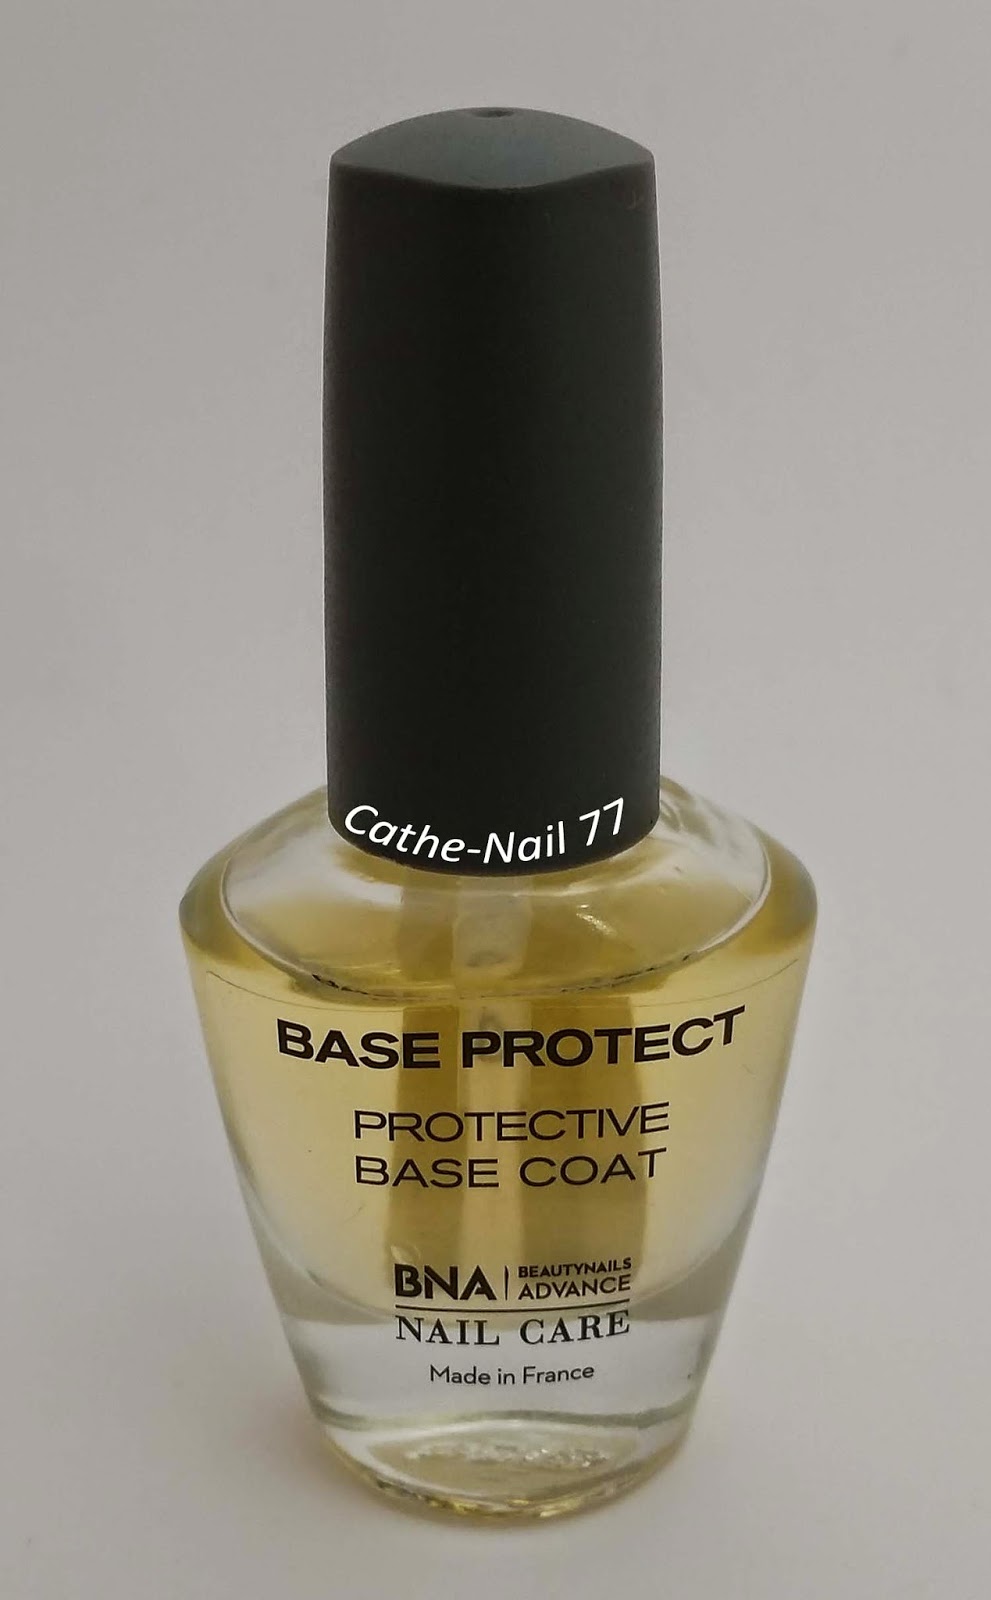 http://www.beautynails.com/vernis-a-ongles/nouvelles-collections-2013/base-et-top-coat/base-protect.html